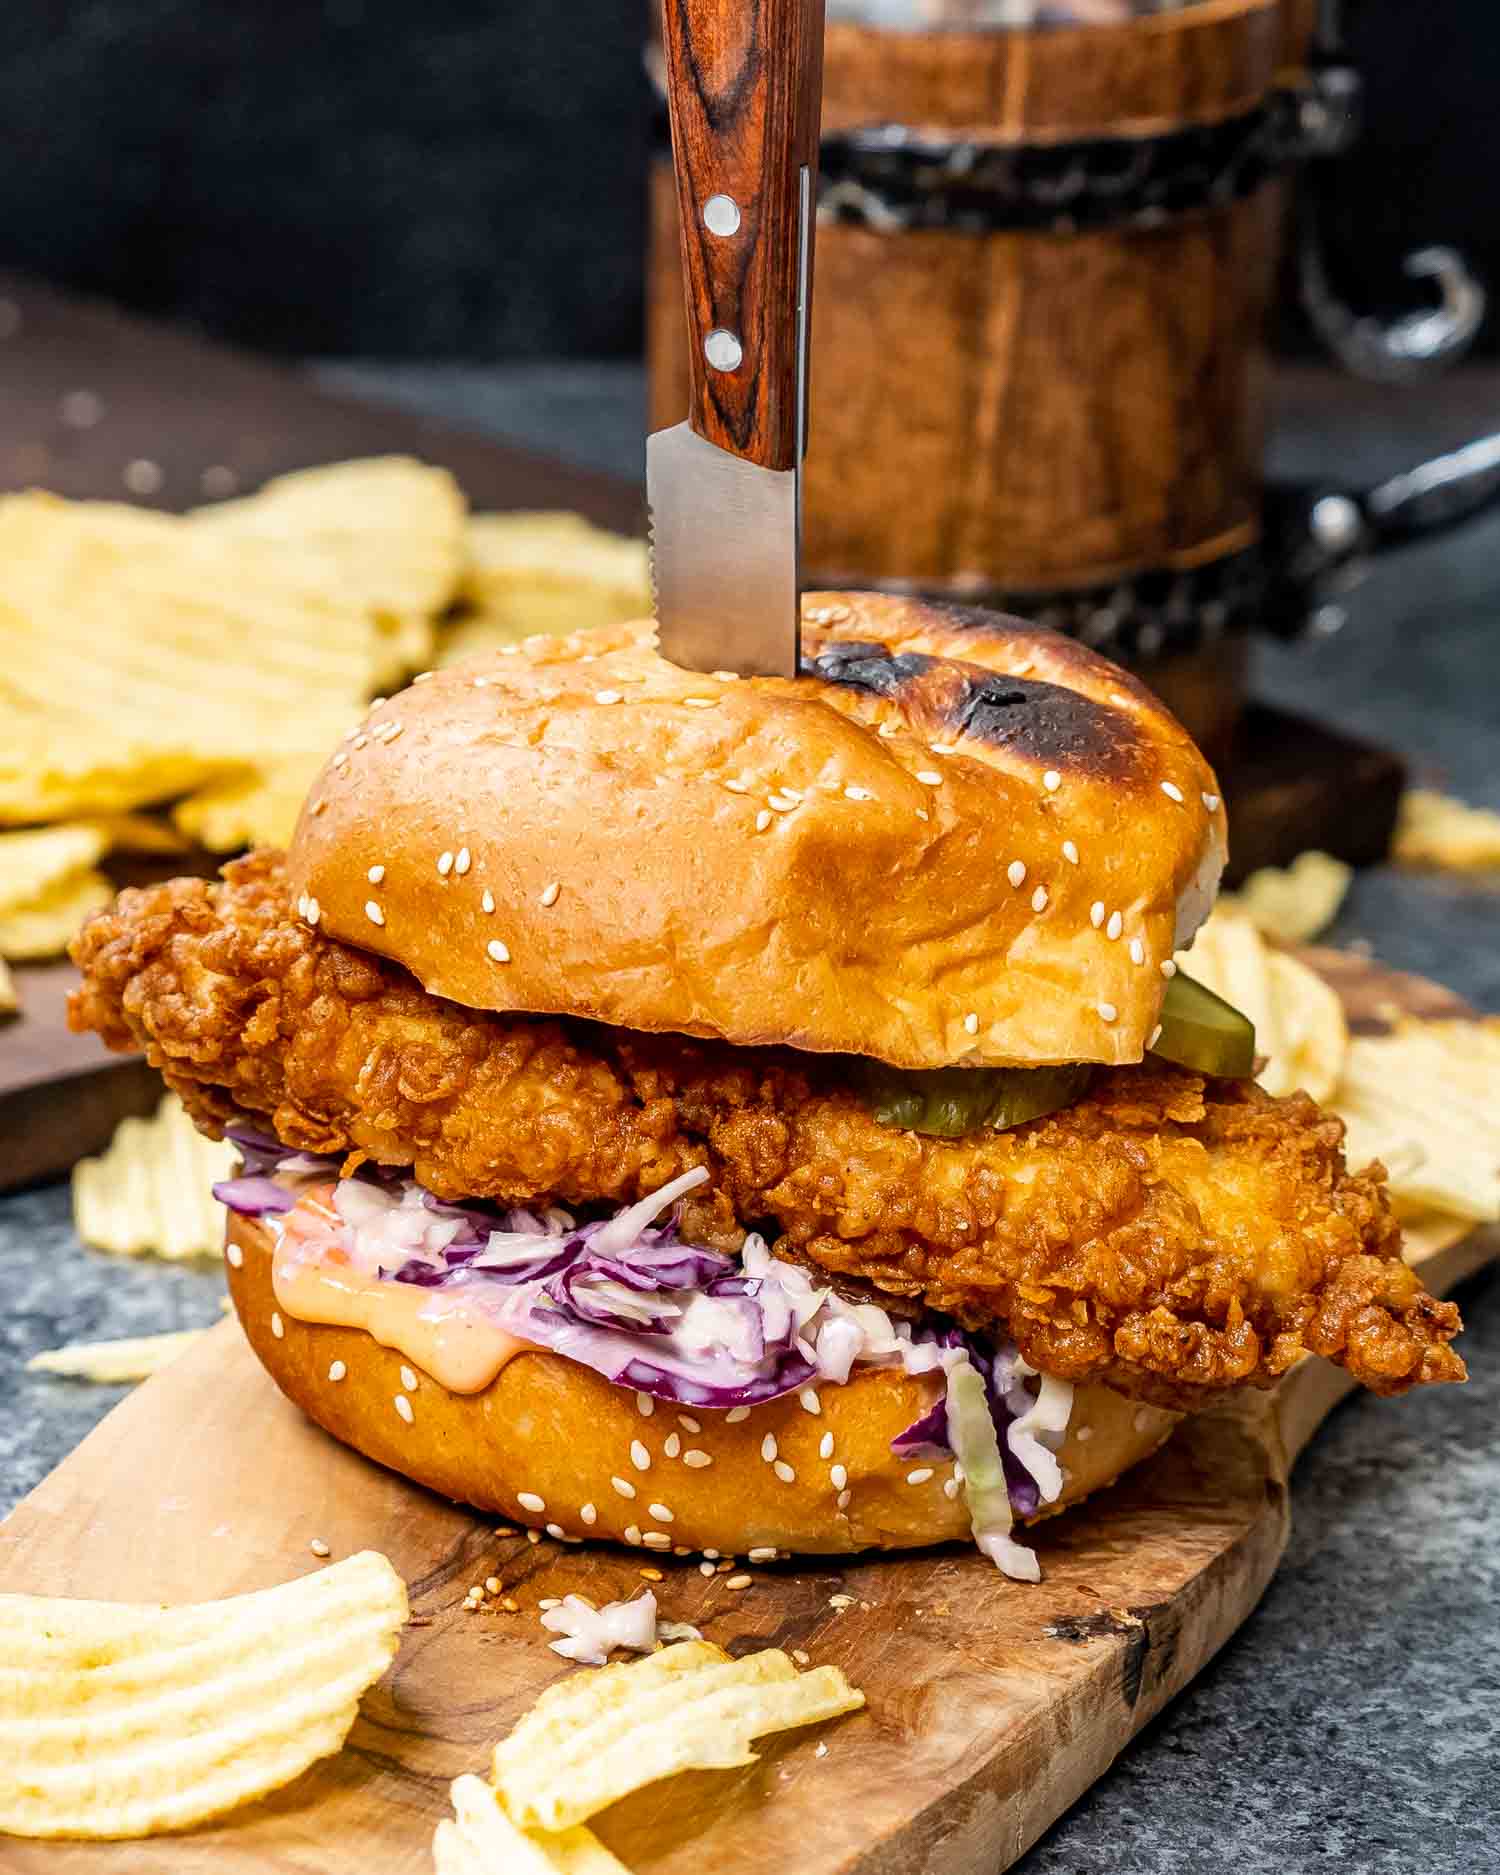 a crispy fried chicken sandwich with coleslaw on a cutting board with potato chips.